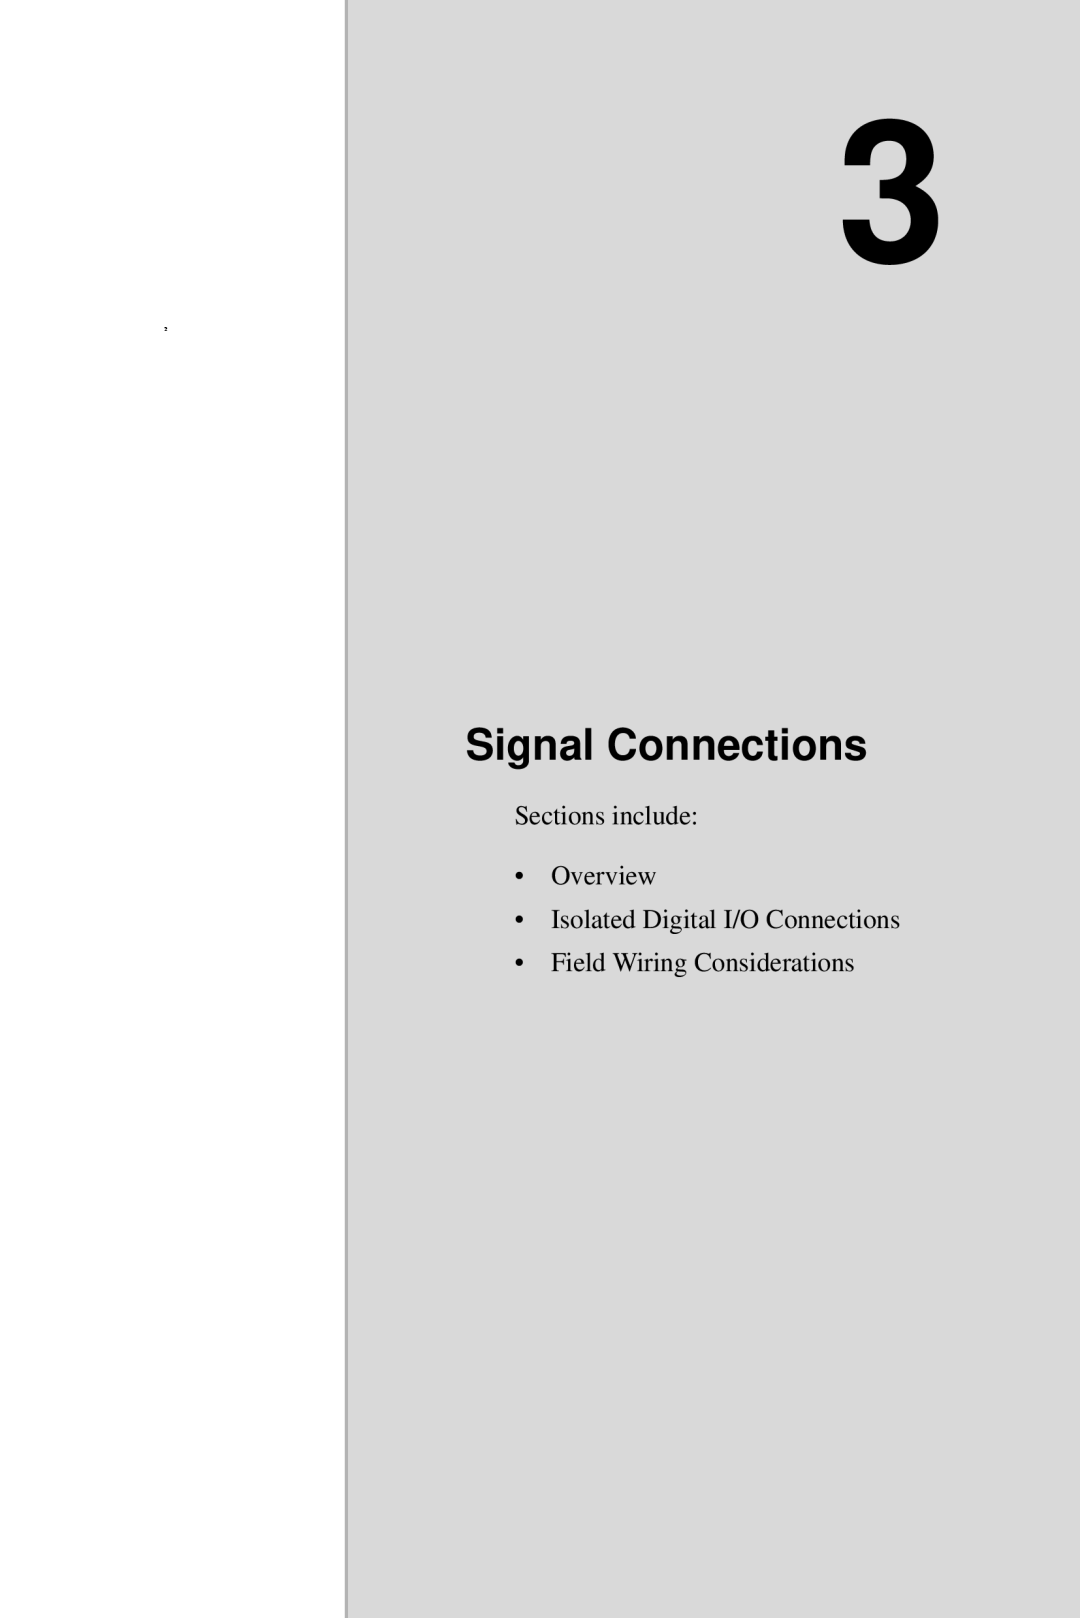 Omega USB-4750 Signal Connections, Sections include Overview Isolated Digital I/O Connections, Field Wiring Considerations 